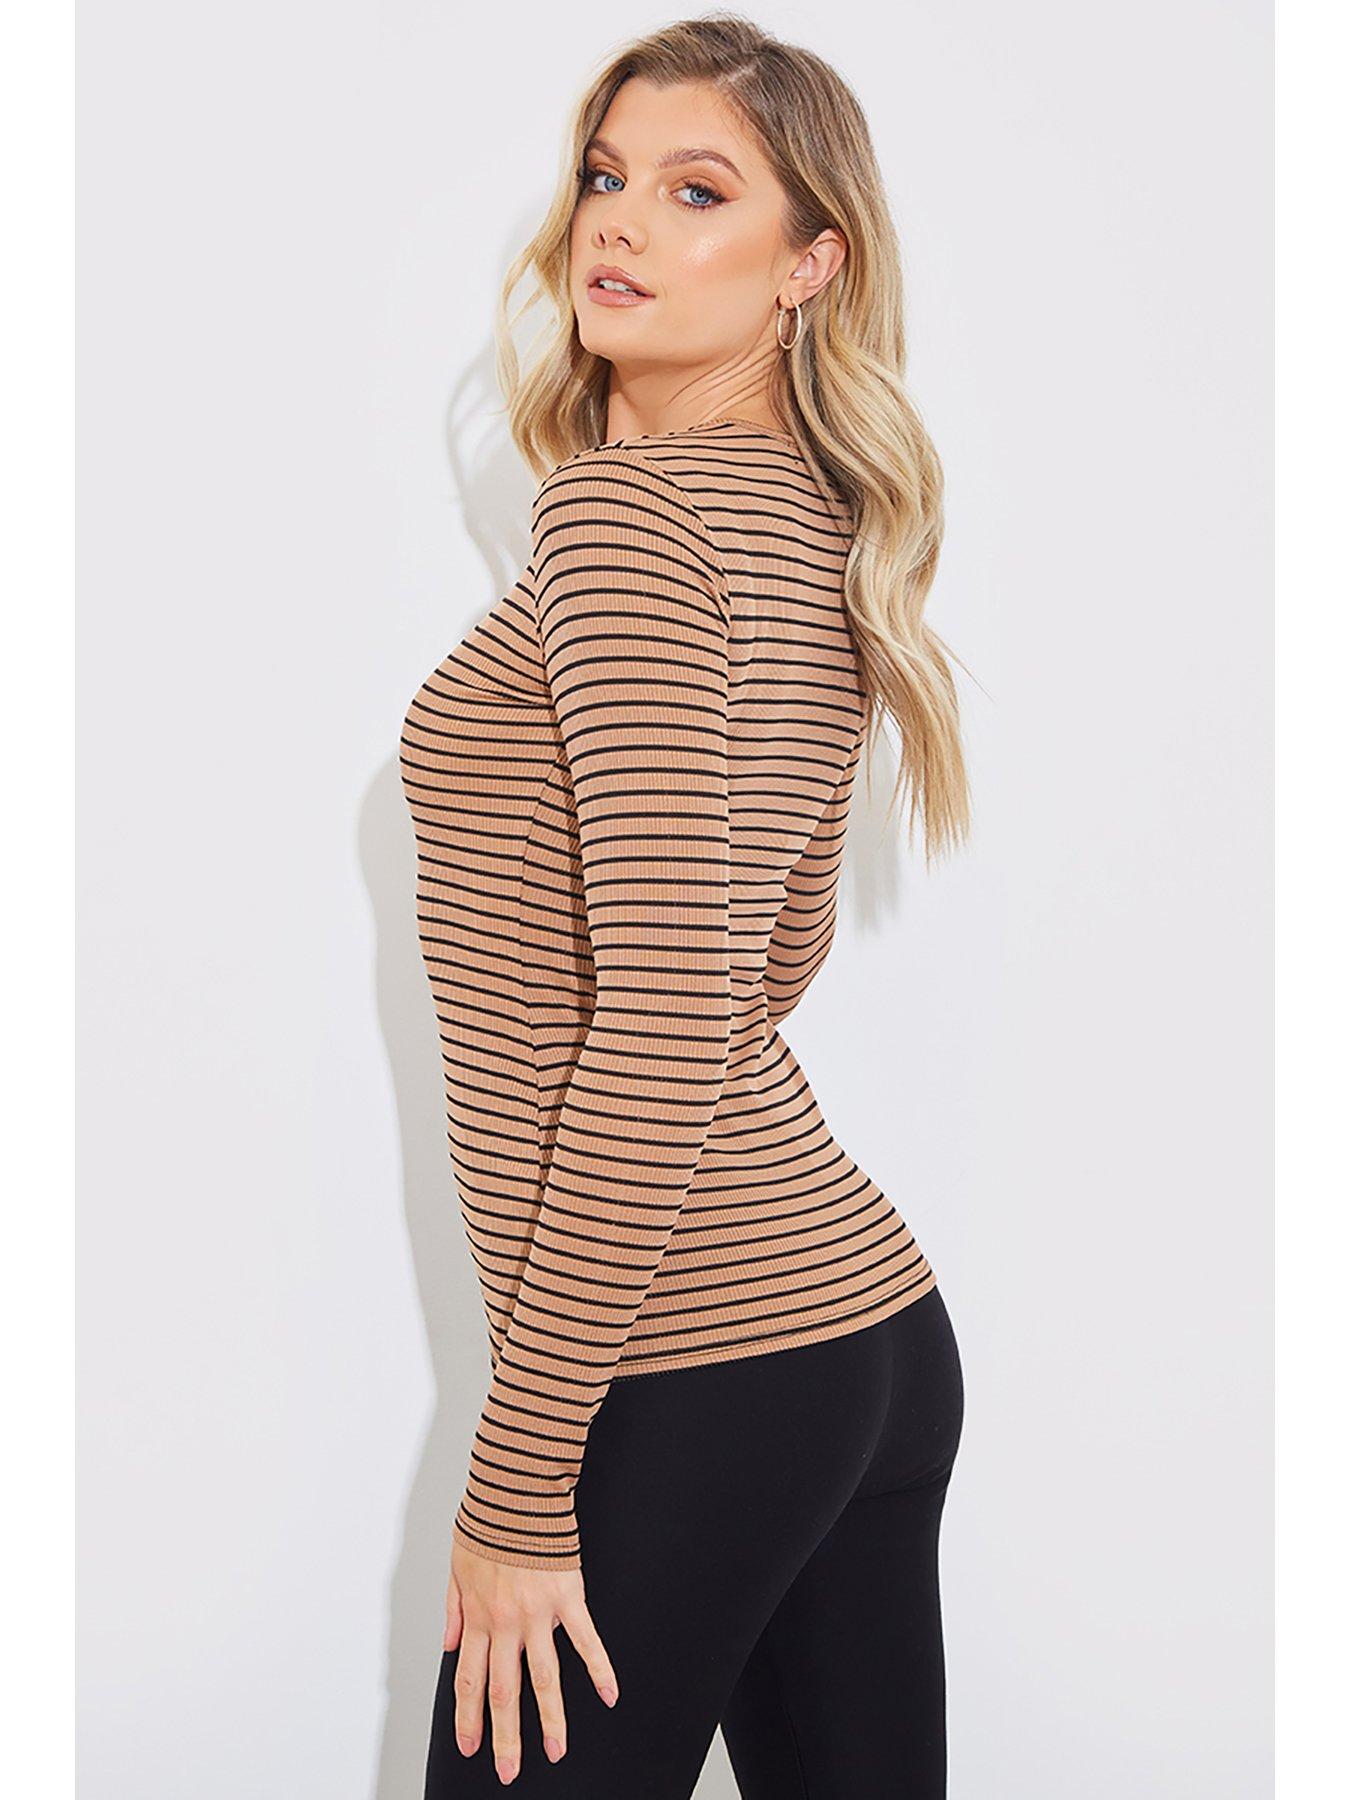 High Neck Long Sleeve Top in Mocha - Modest Fashion